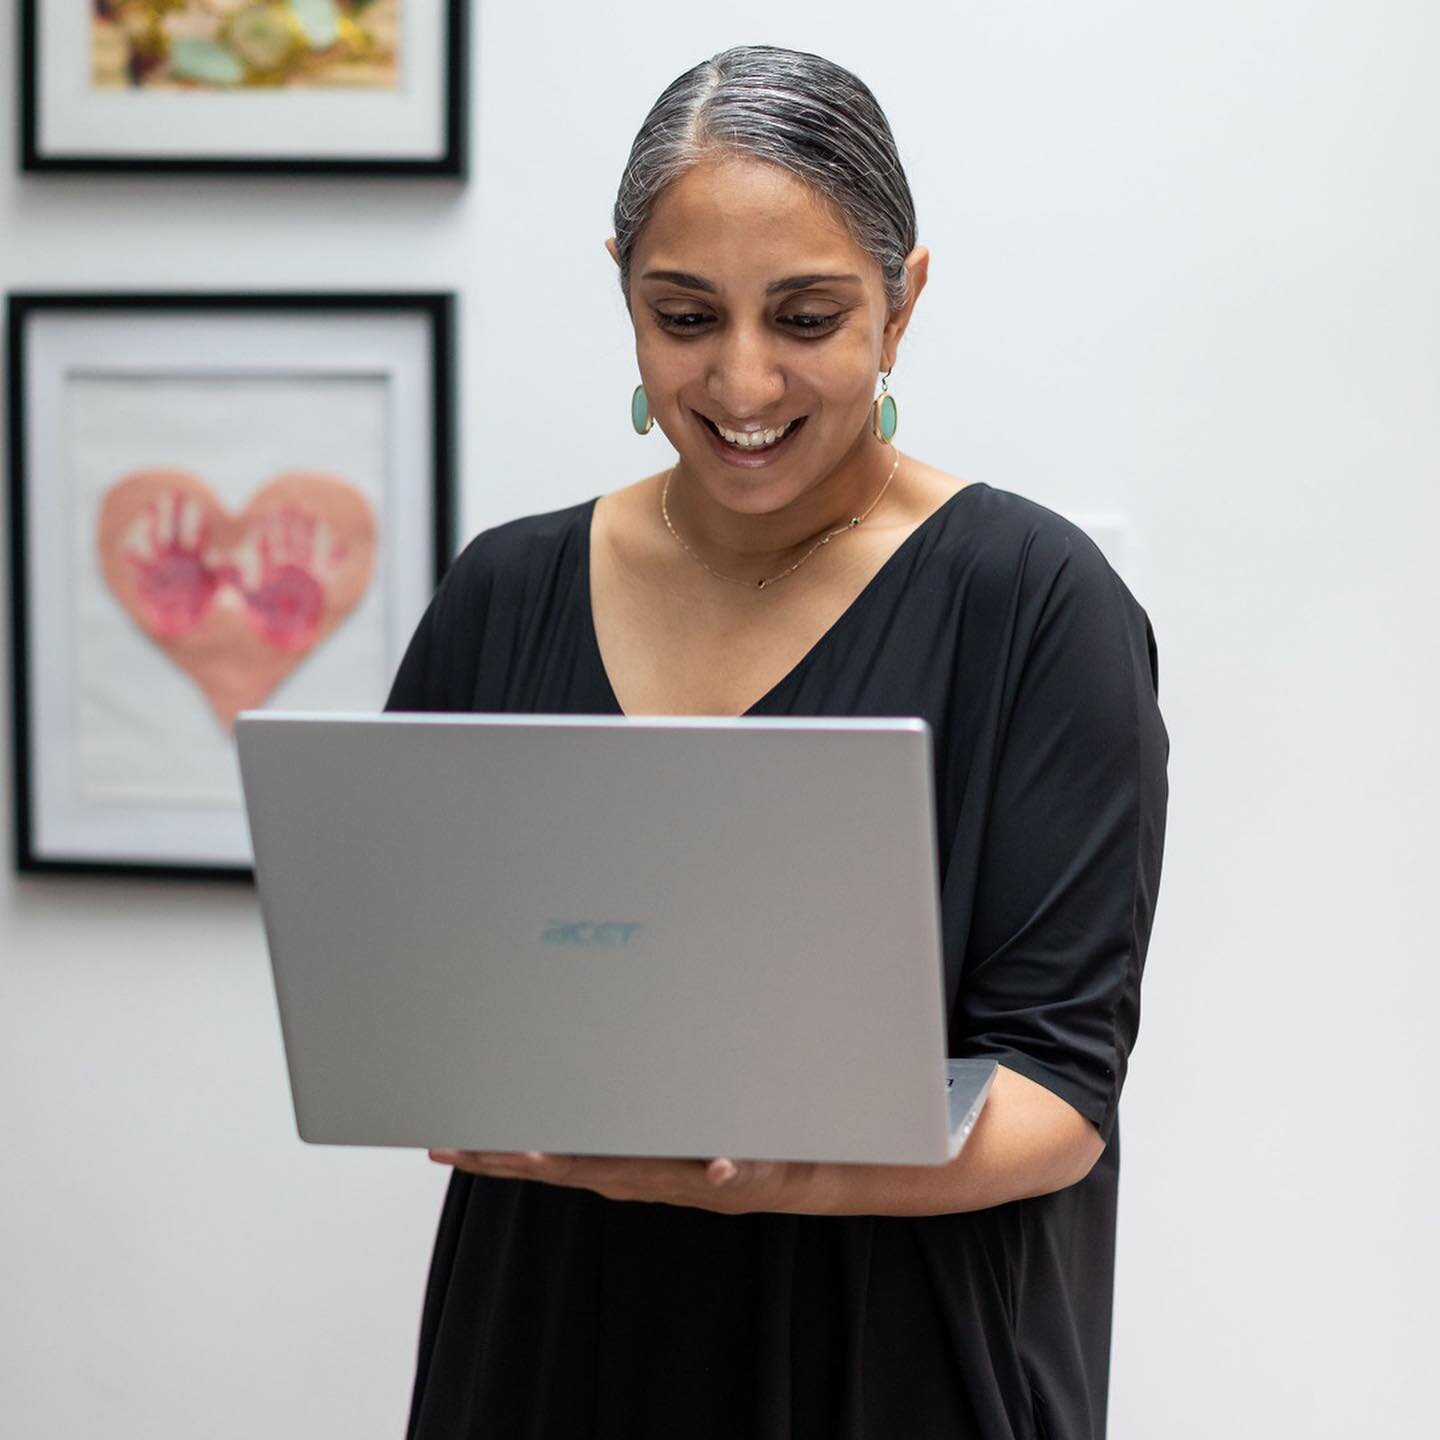 I&rsquo;ve gotten the question &ldquo;so how do you juggle so many things?&rdquo; often. Aside from the common answers, here&rsquo;s a big one:
I have a great laptop (a powerful one): the @Acer_america Swift 3 powered by @Intel&rsquo;s Evo 11th Gen C